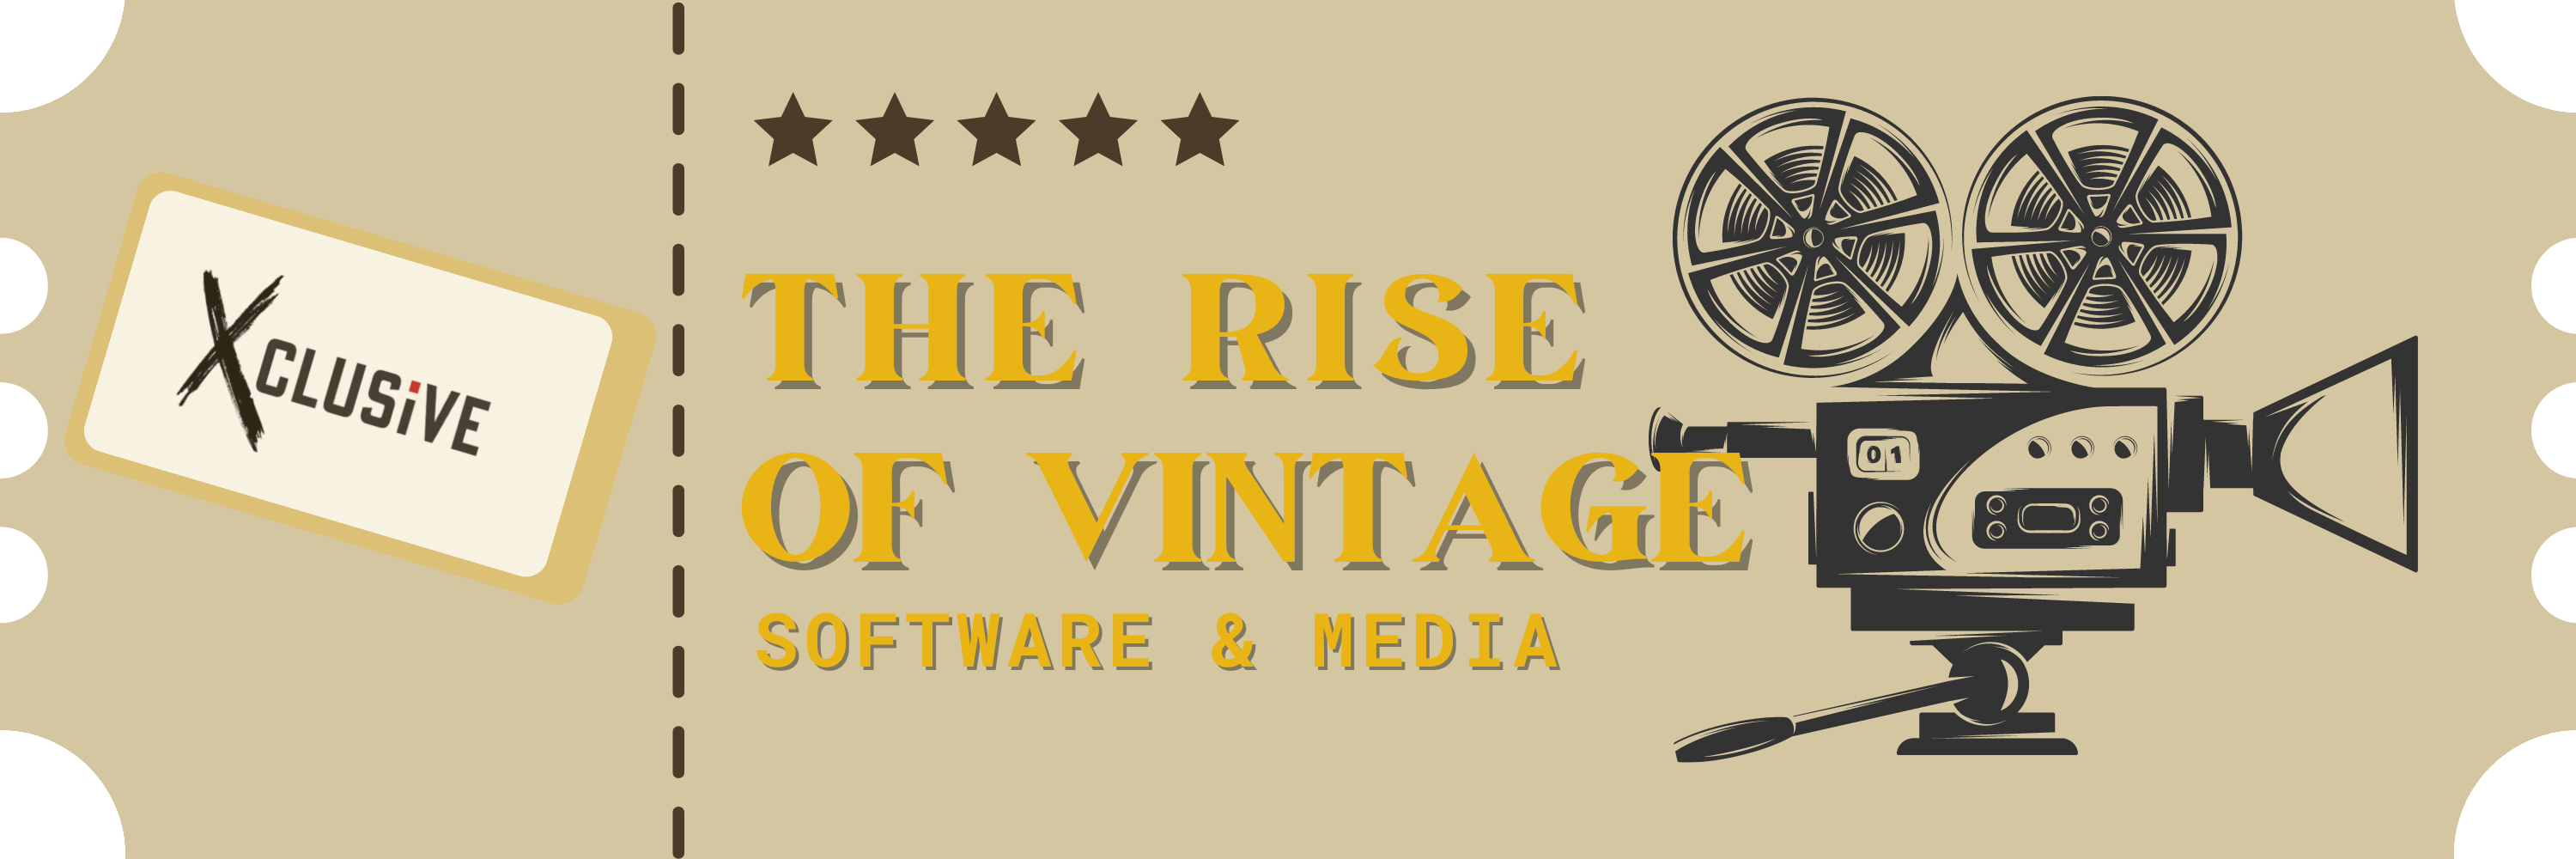 The Rise in Value of Vintage Software & Media